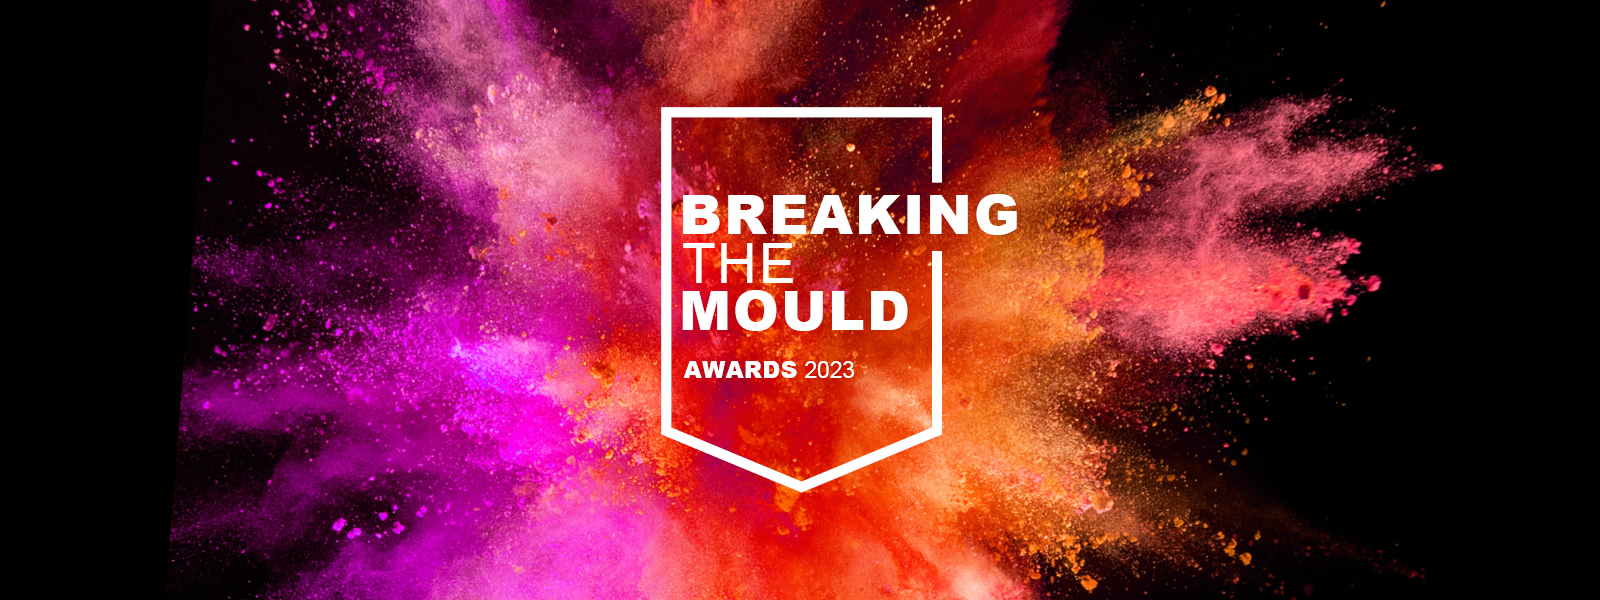 Breaking the Mould banner